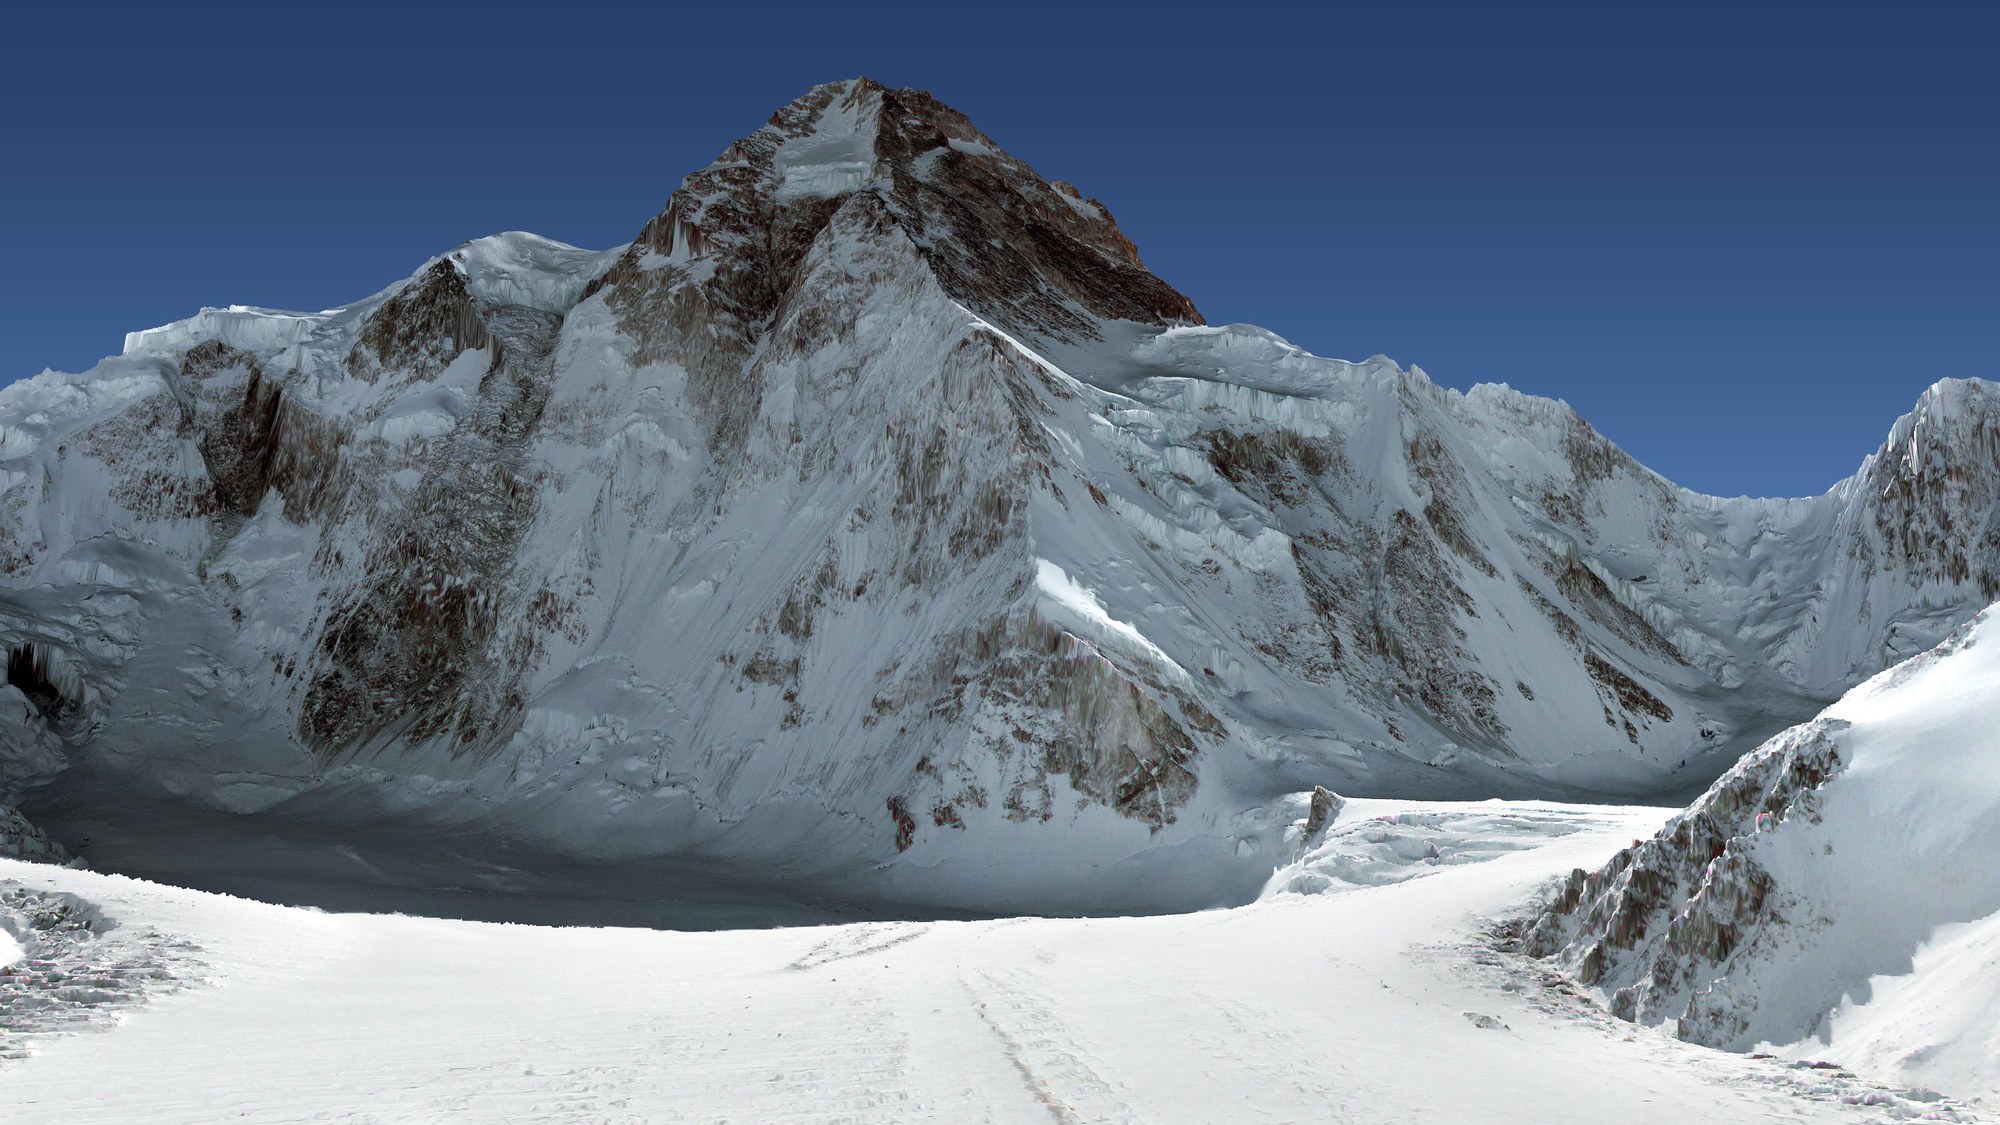 North Face of K2